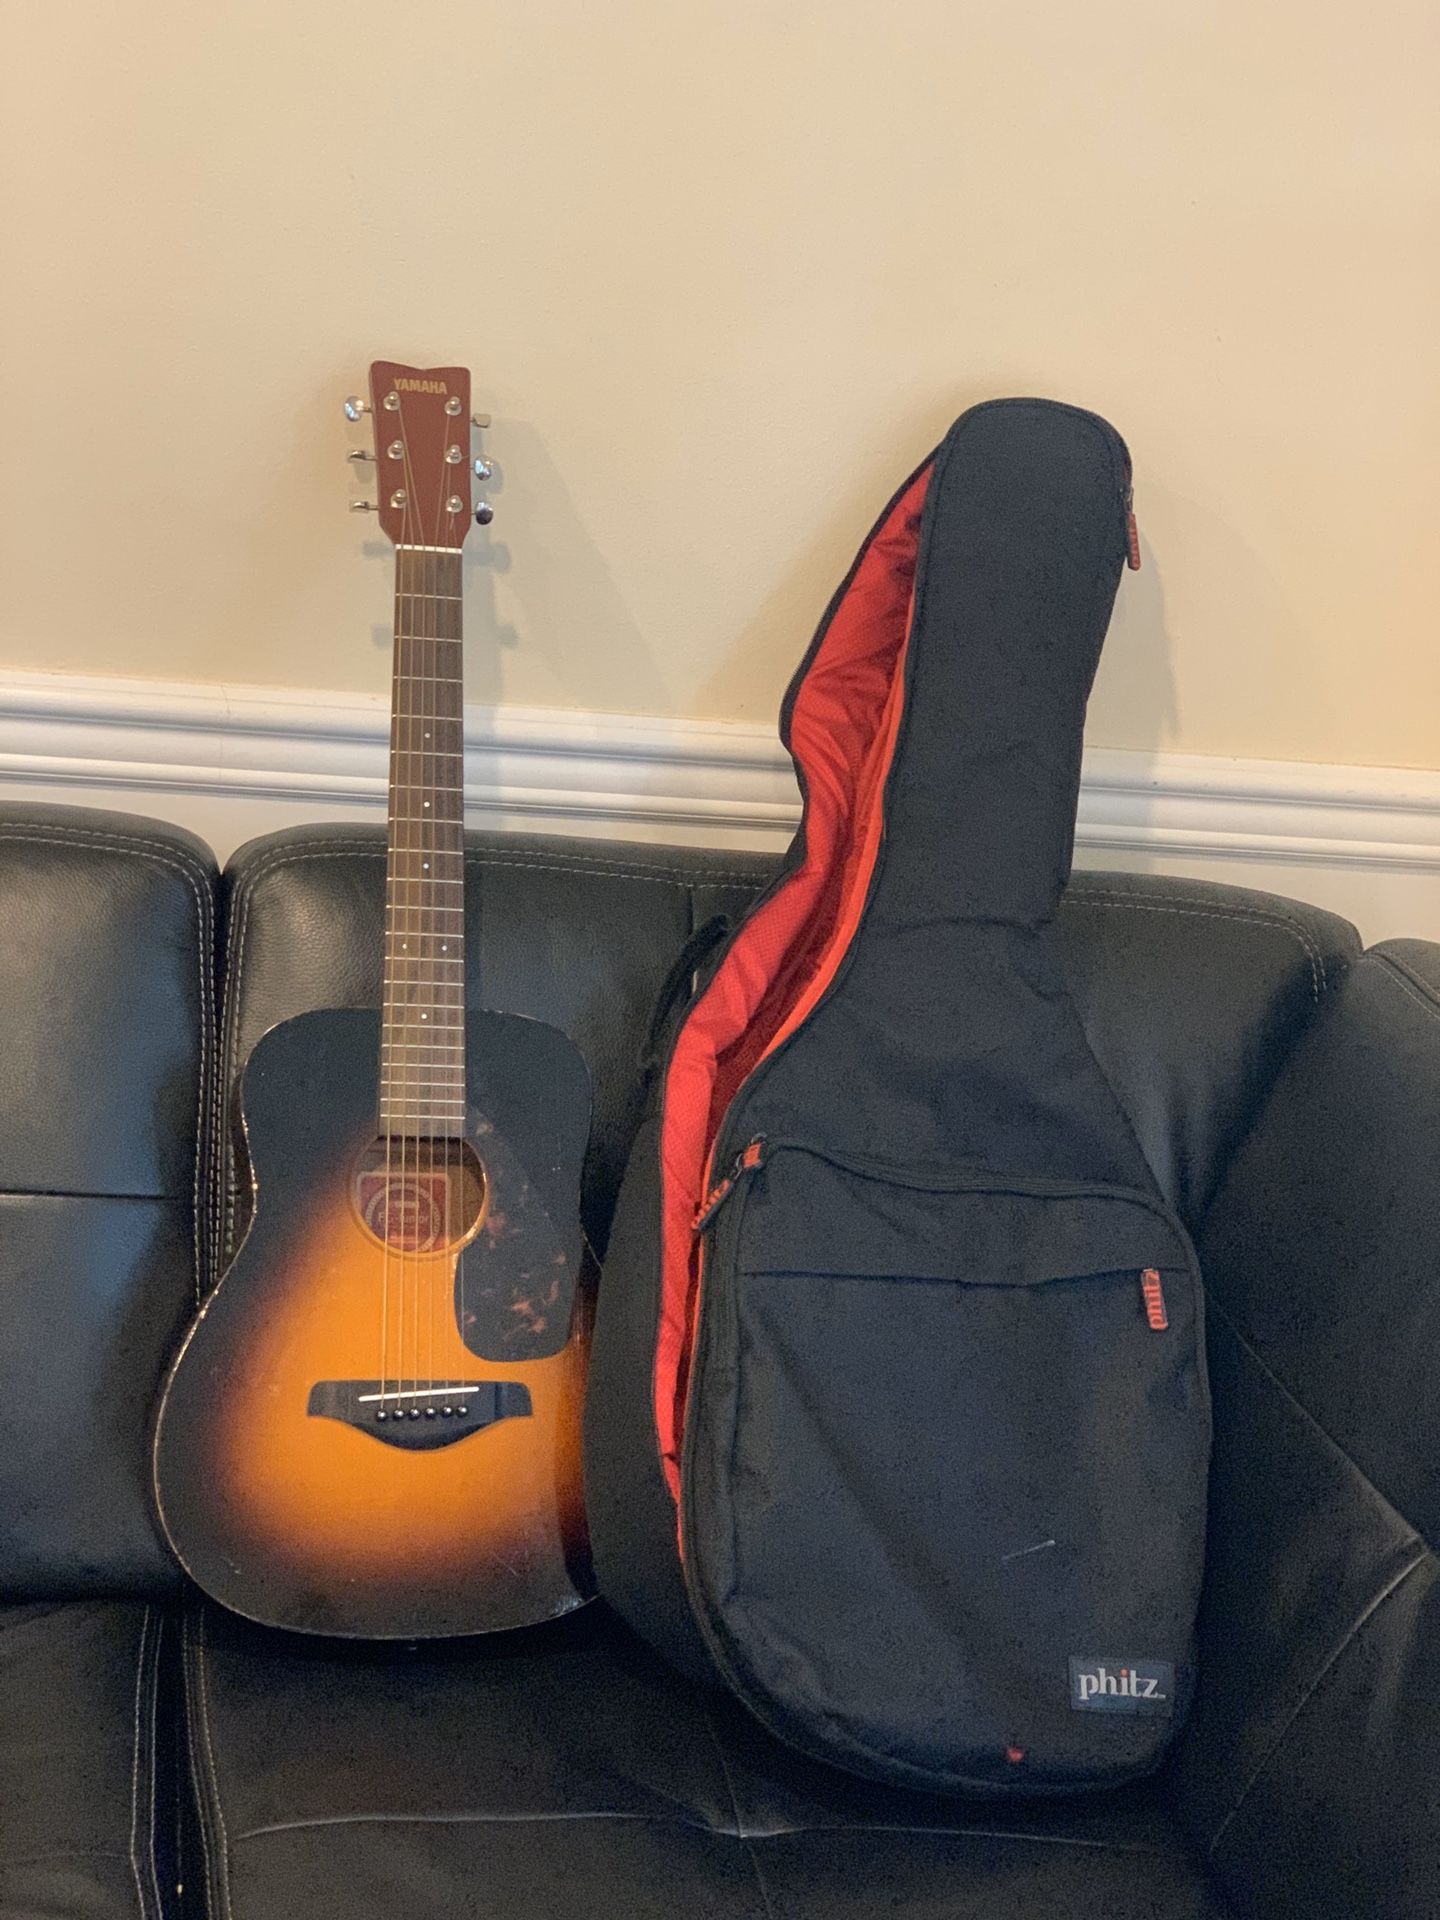 Kids Guitar with case, the guitar has minor scratches, but works as new